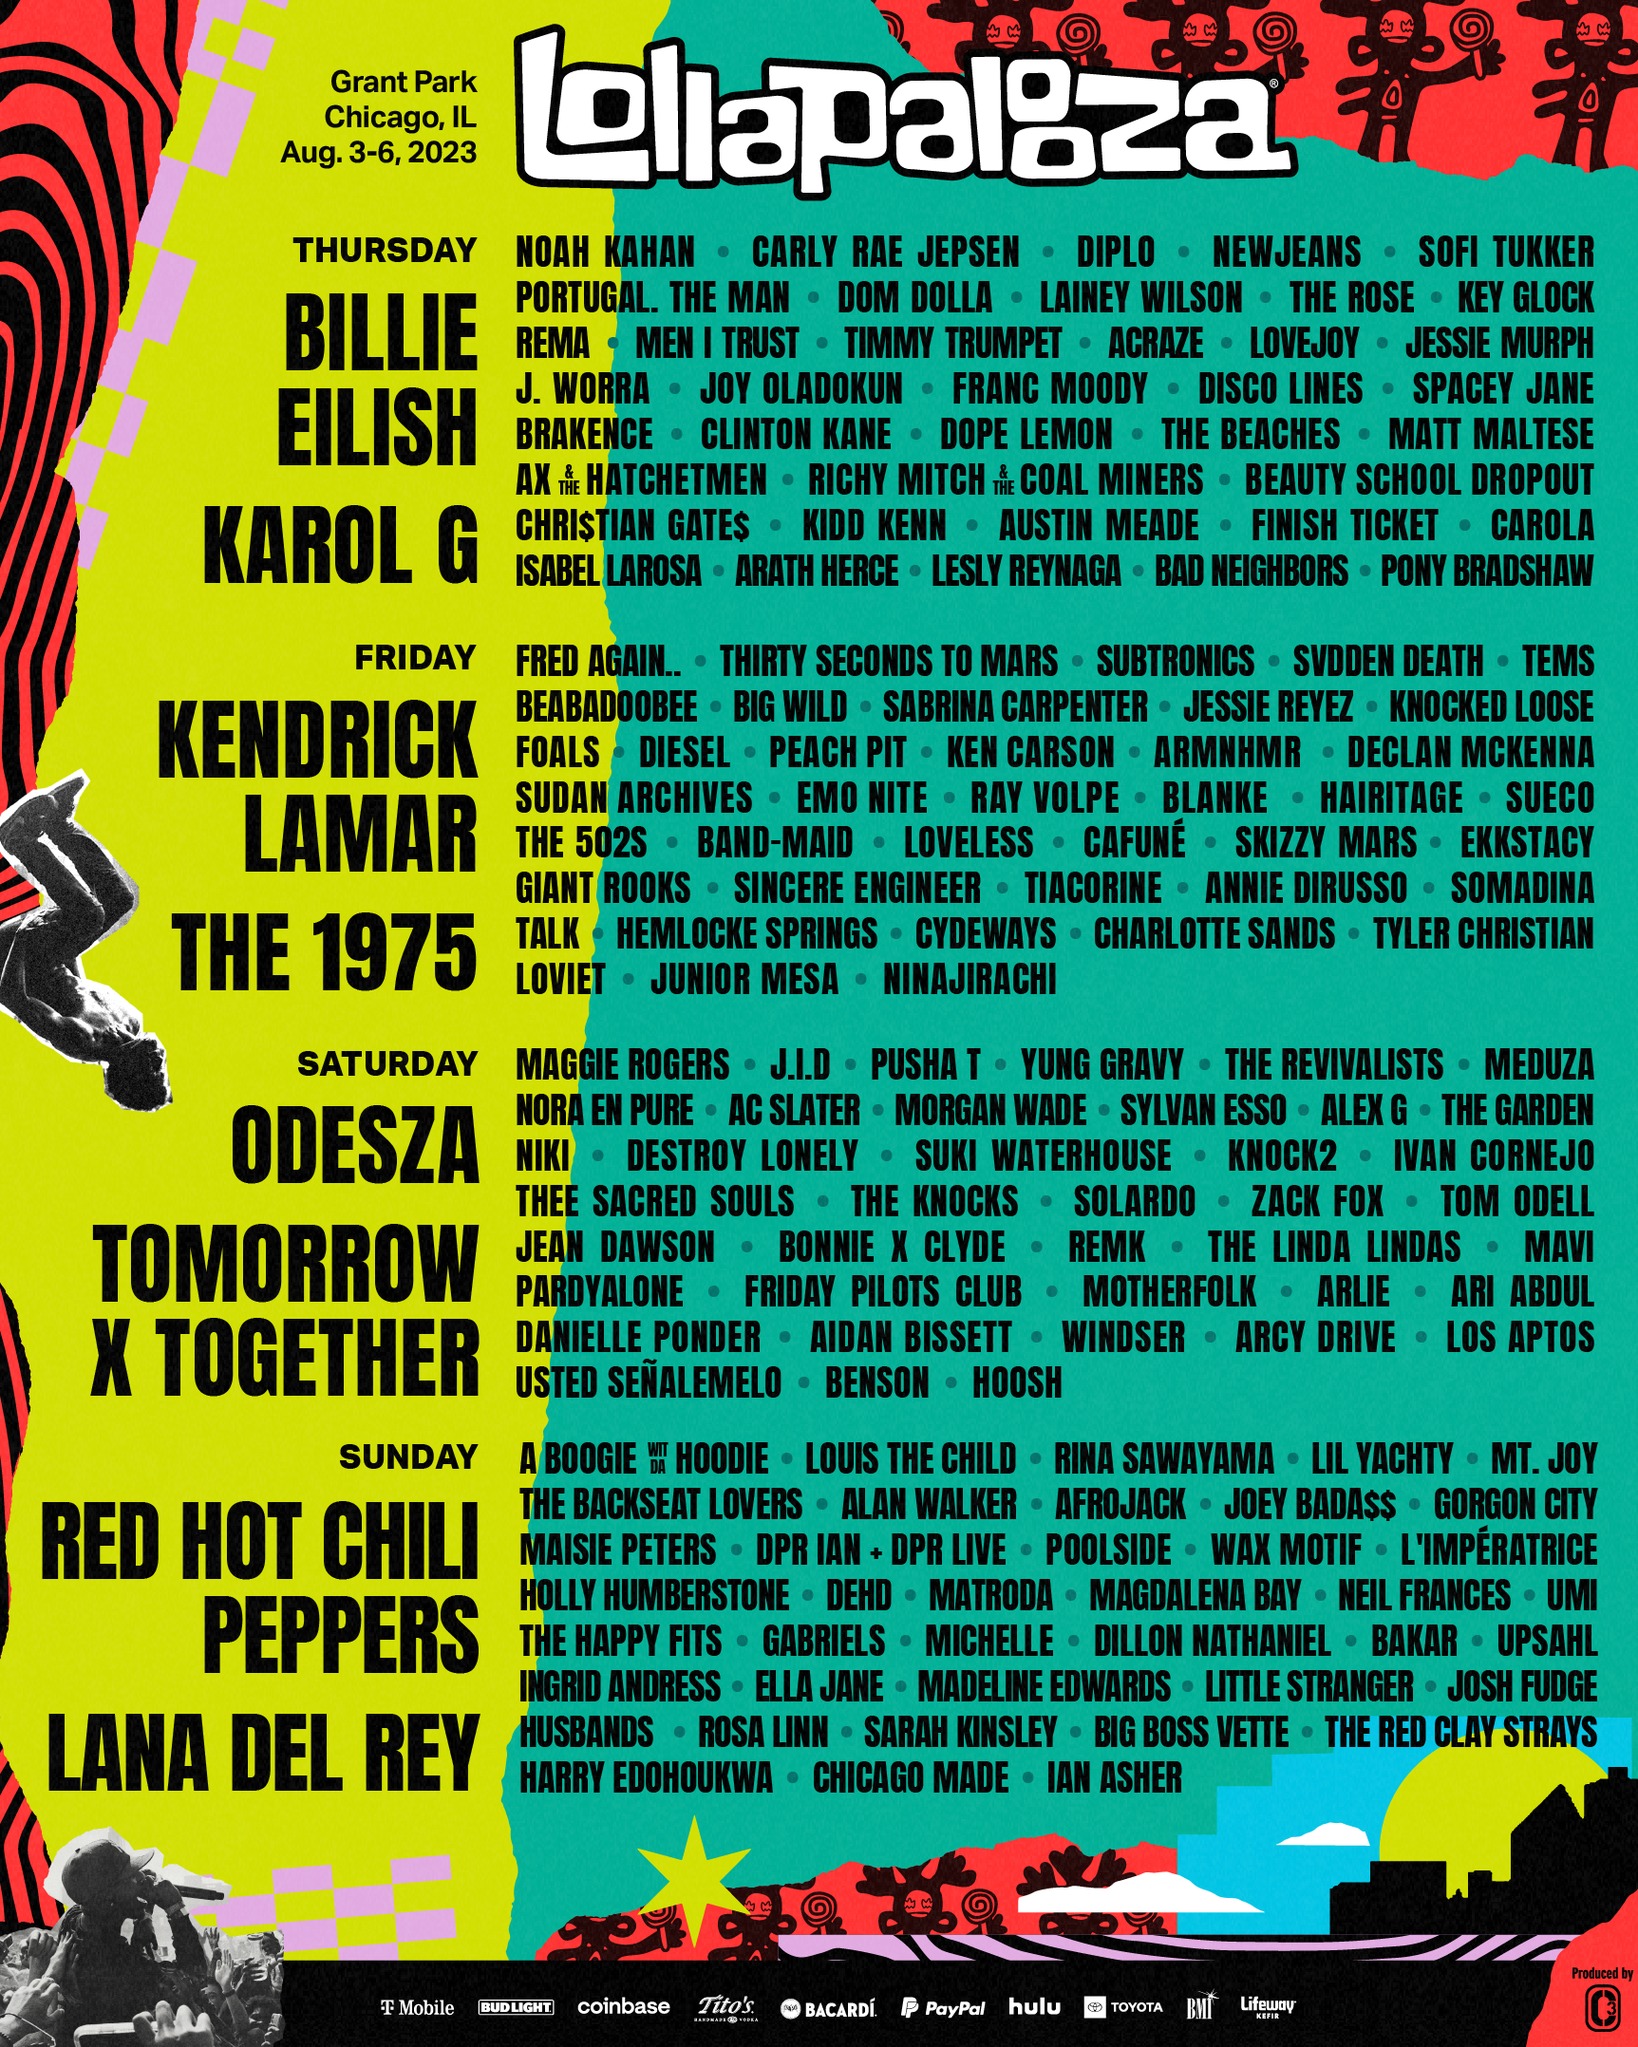 Lollapalooza 2023 lineup poster